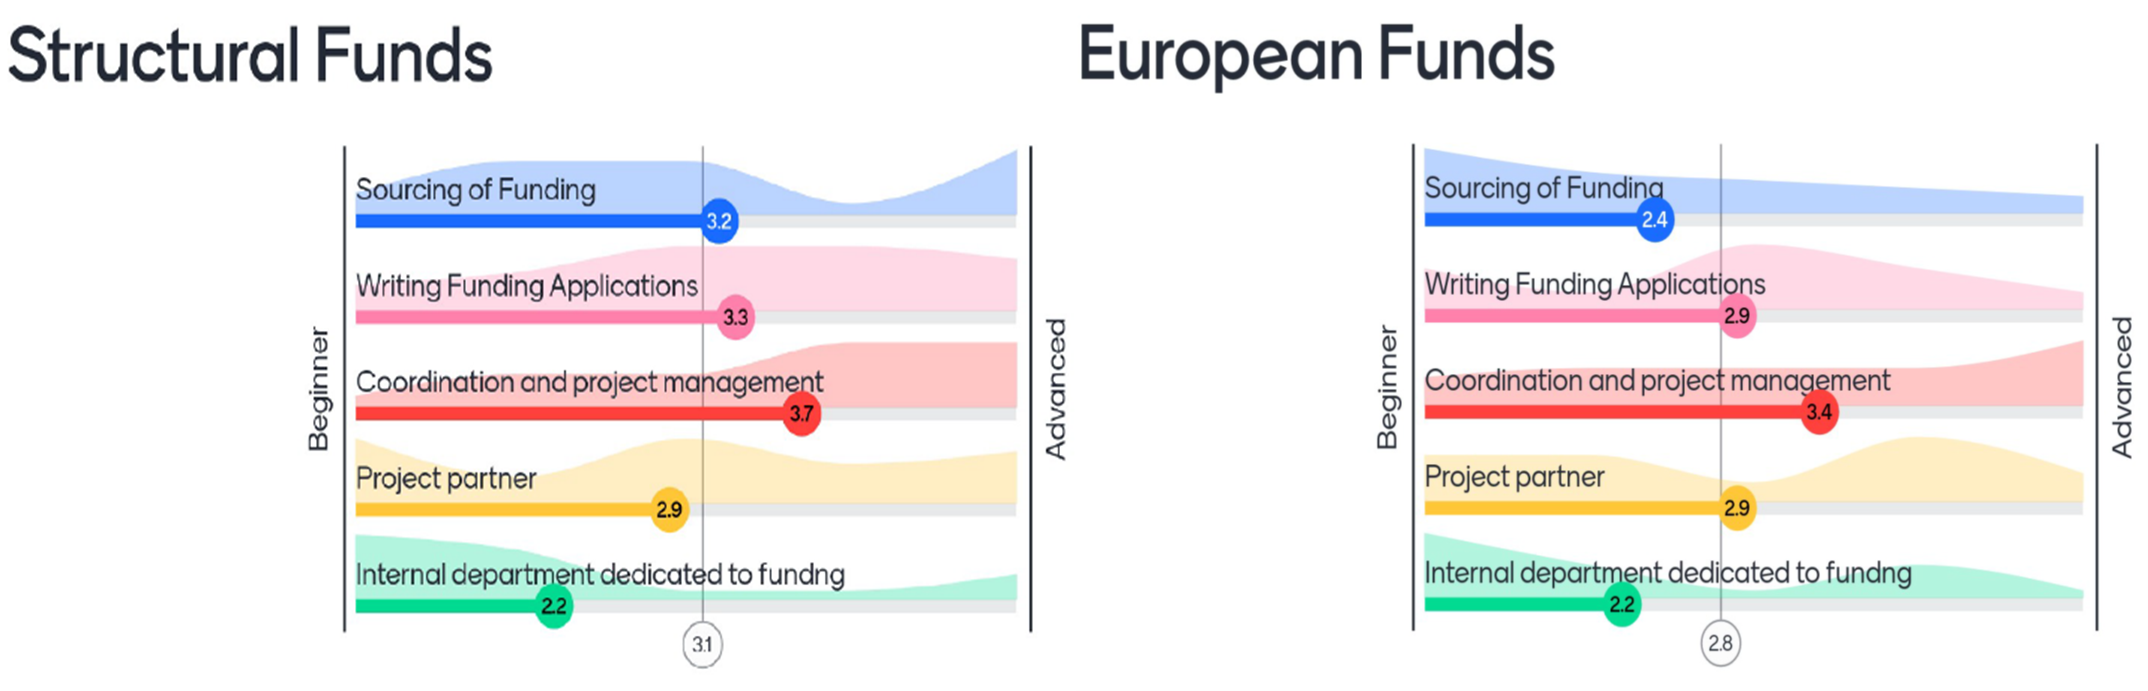 Live poll about structural and european funds